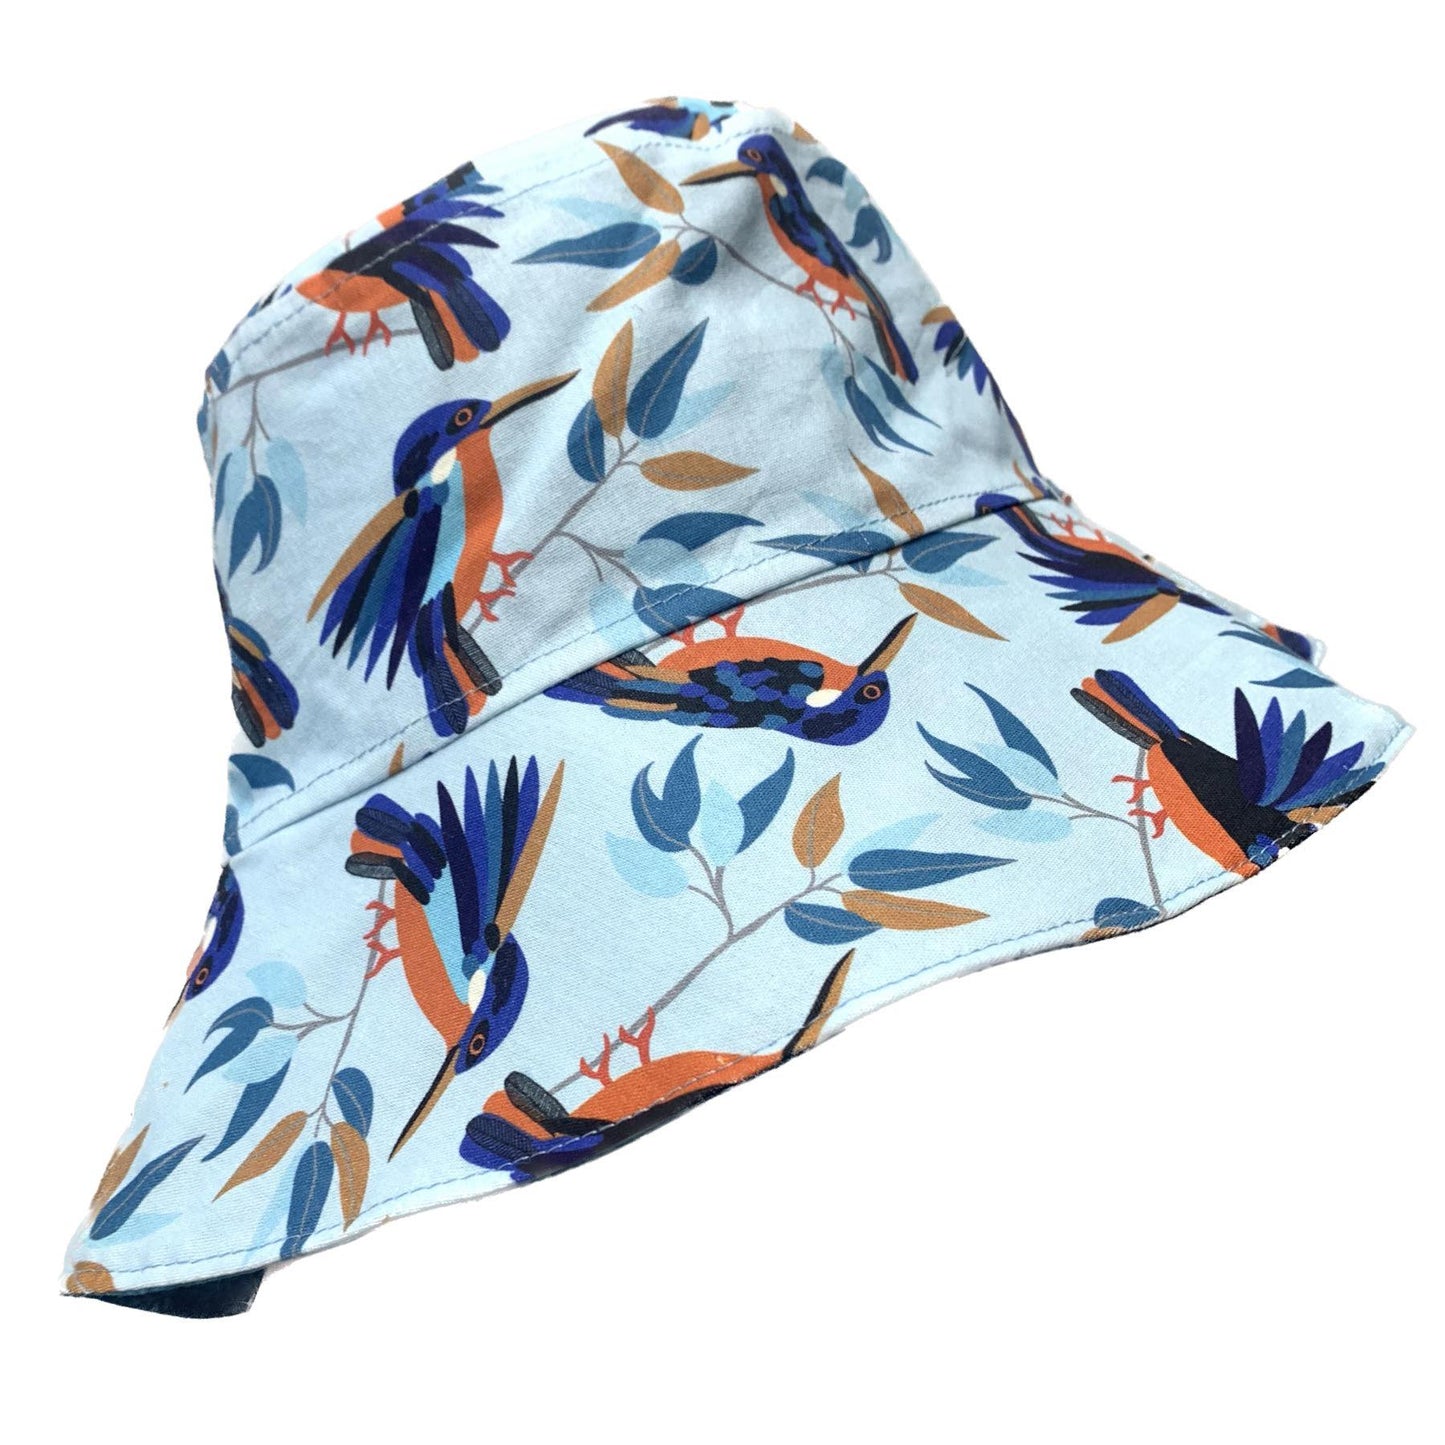 Teacups n Quilts- Kingfisher Fabric Hat- Adult Size